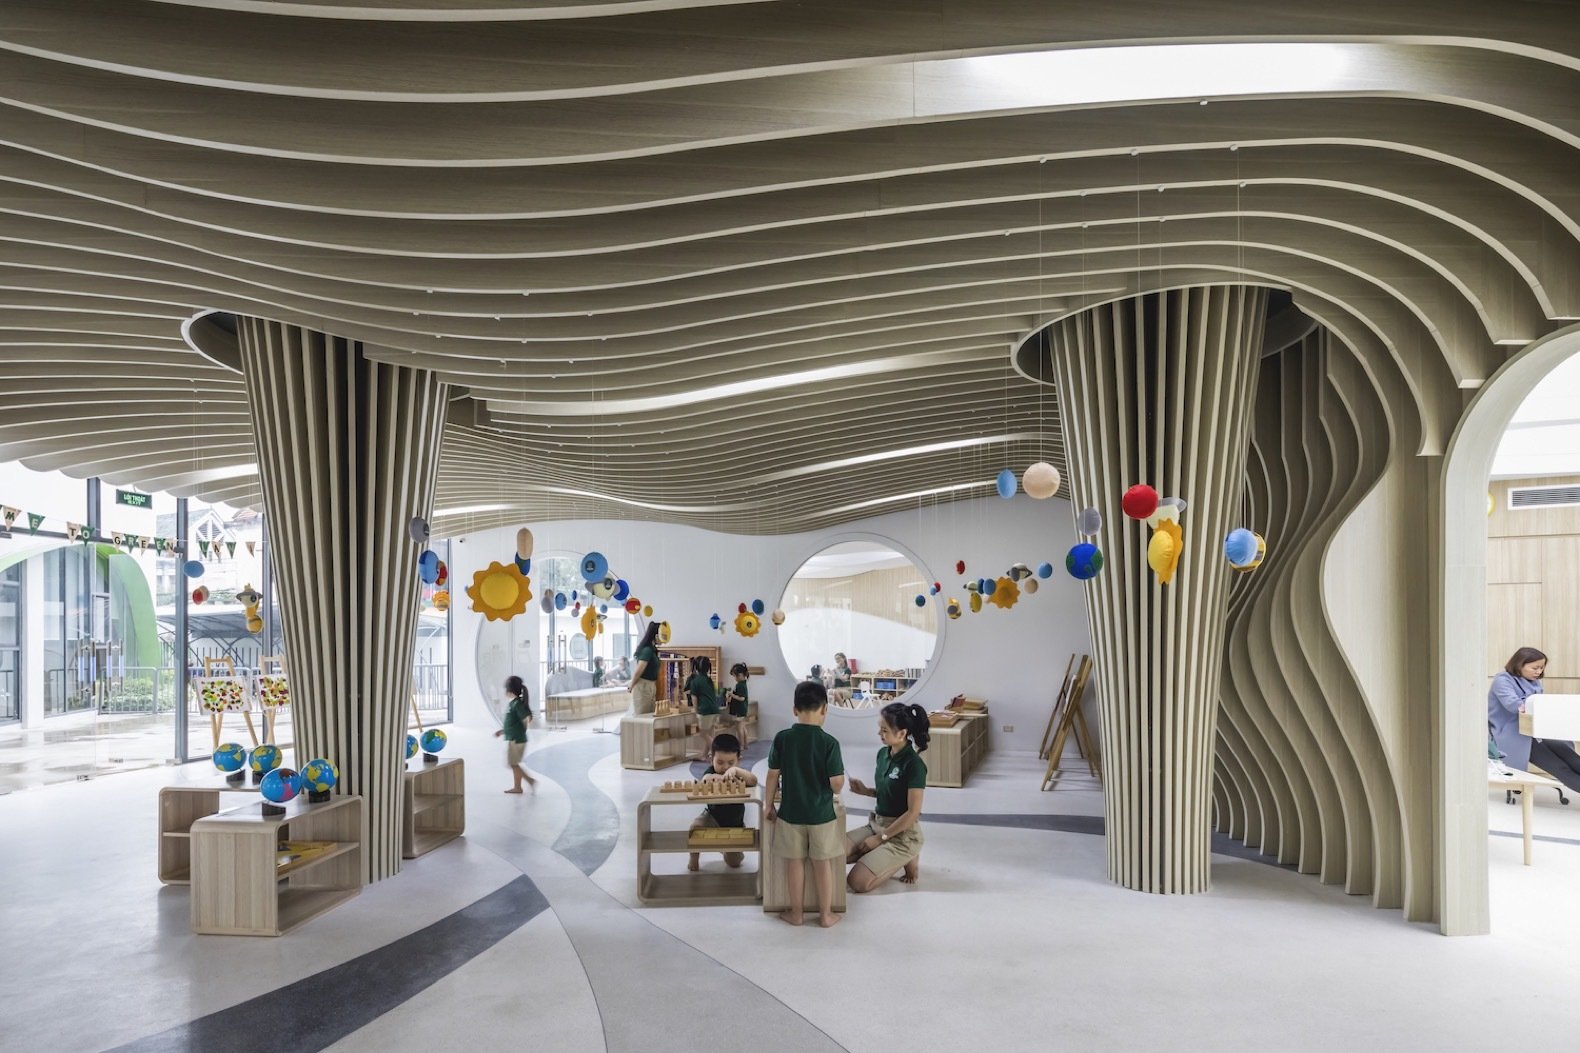 undulating-ribbed-ceilings-made-of-plywood-add-a-sense-of-play-to-the-interiors